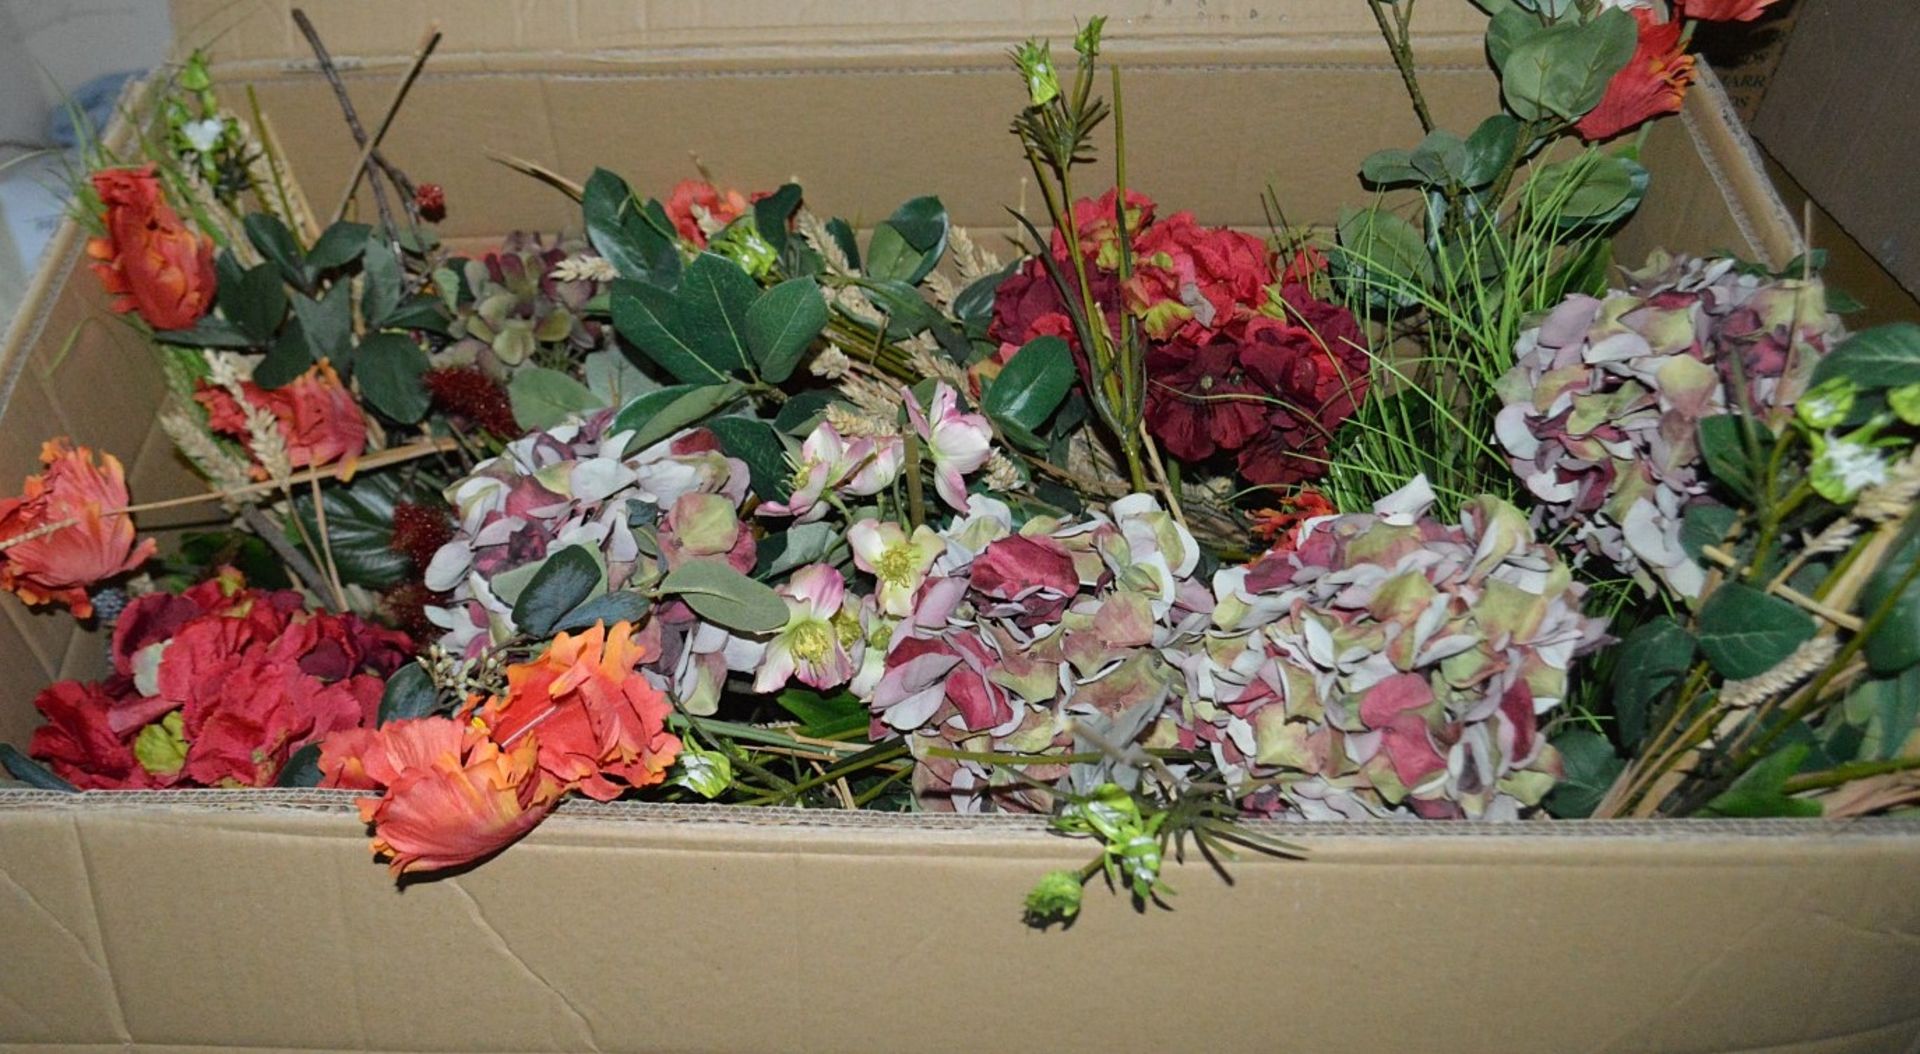 Large Box Of Artificial Wild Flowers and Dried Wheat From High Profile Window / Shop Displays - Image 5 of 7